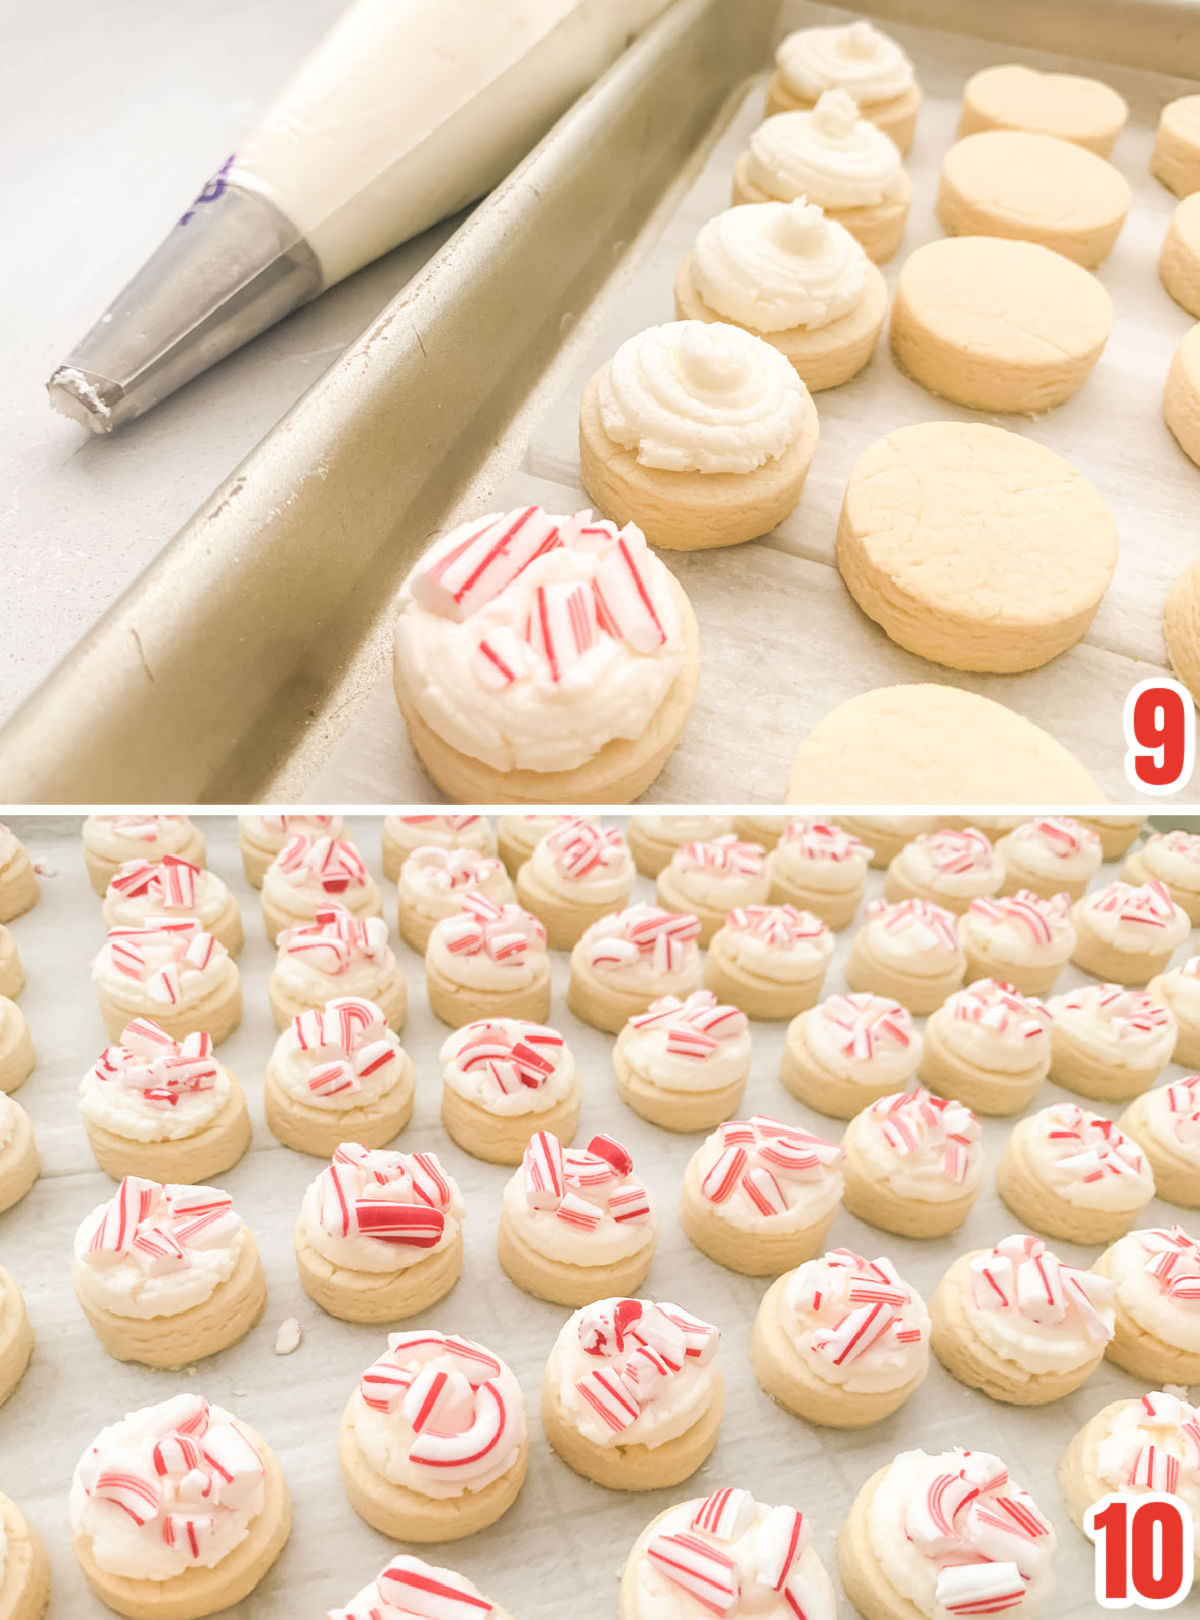 Collage image showing the steps for frosting and decorating the Peppermint Sugar Cookies.